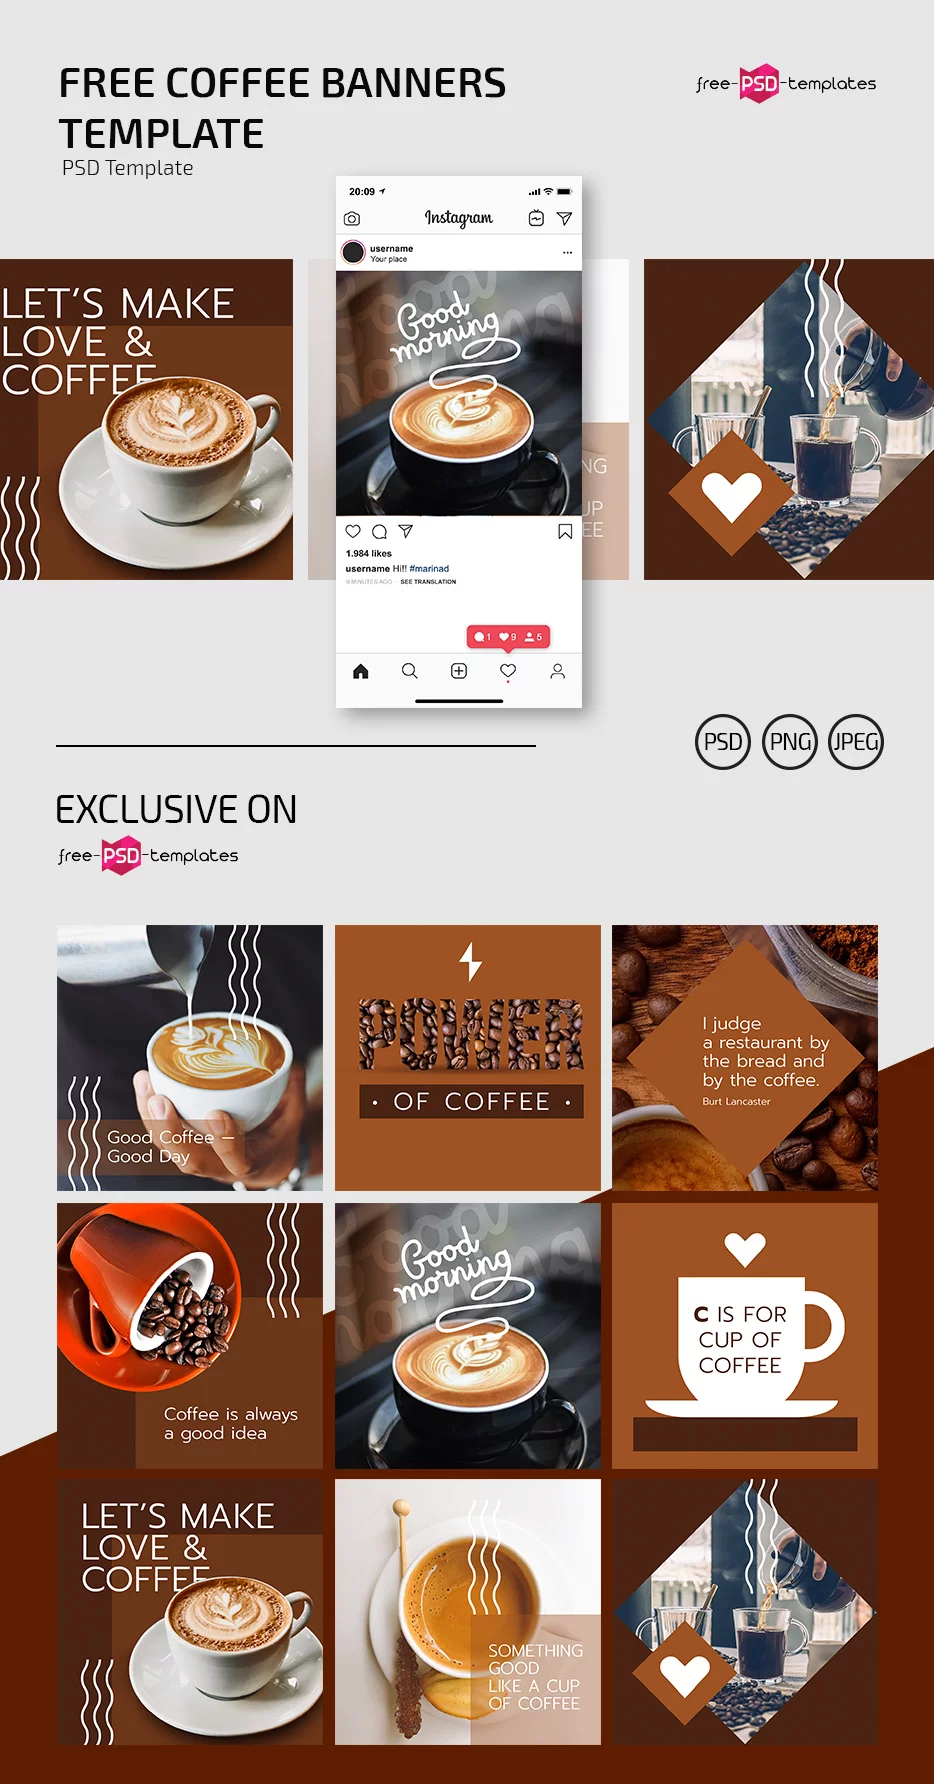 10+ Free Coffee Banner Templates and Images (PSD , PNG)